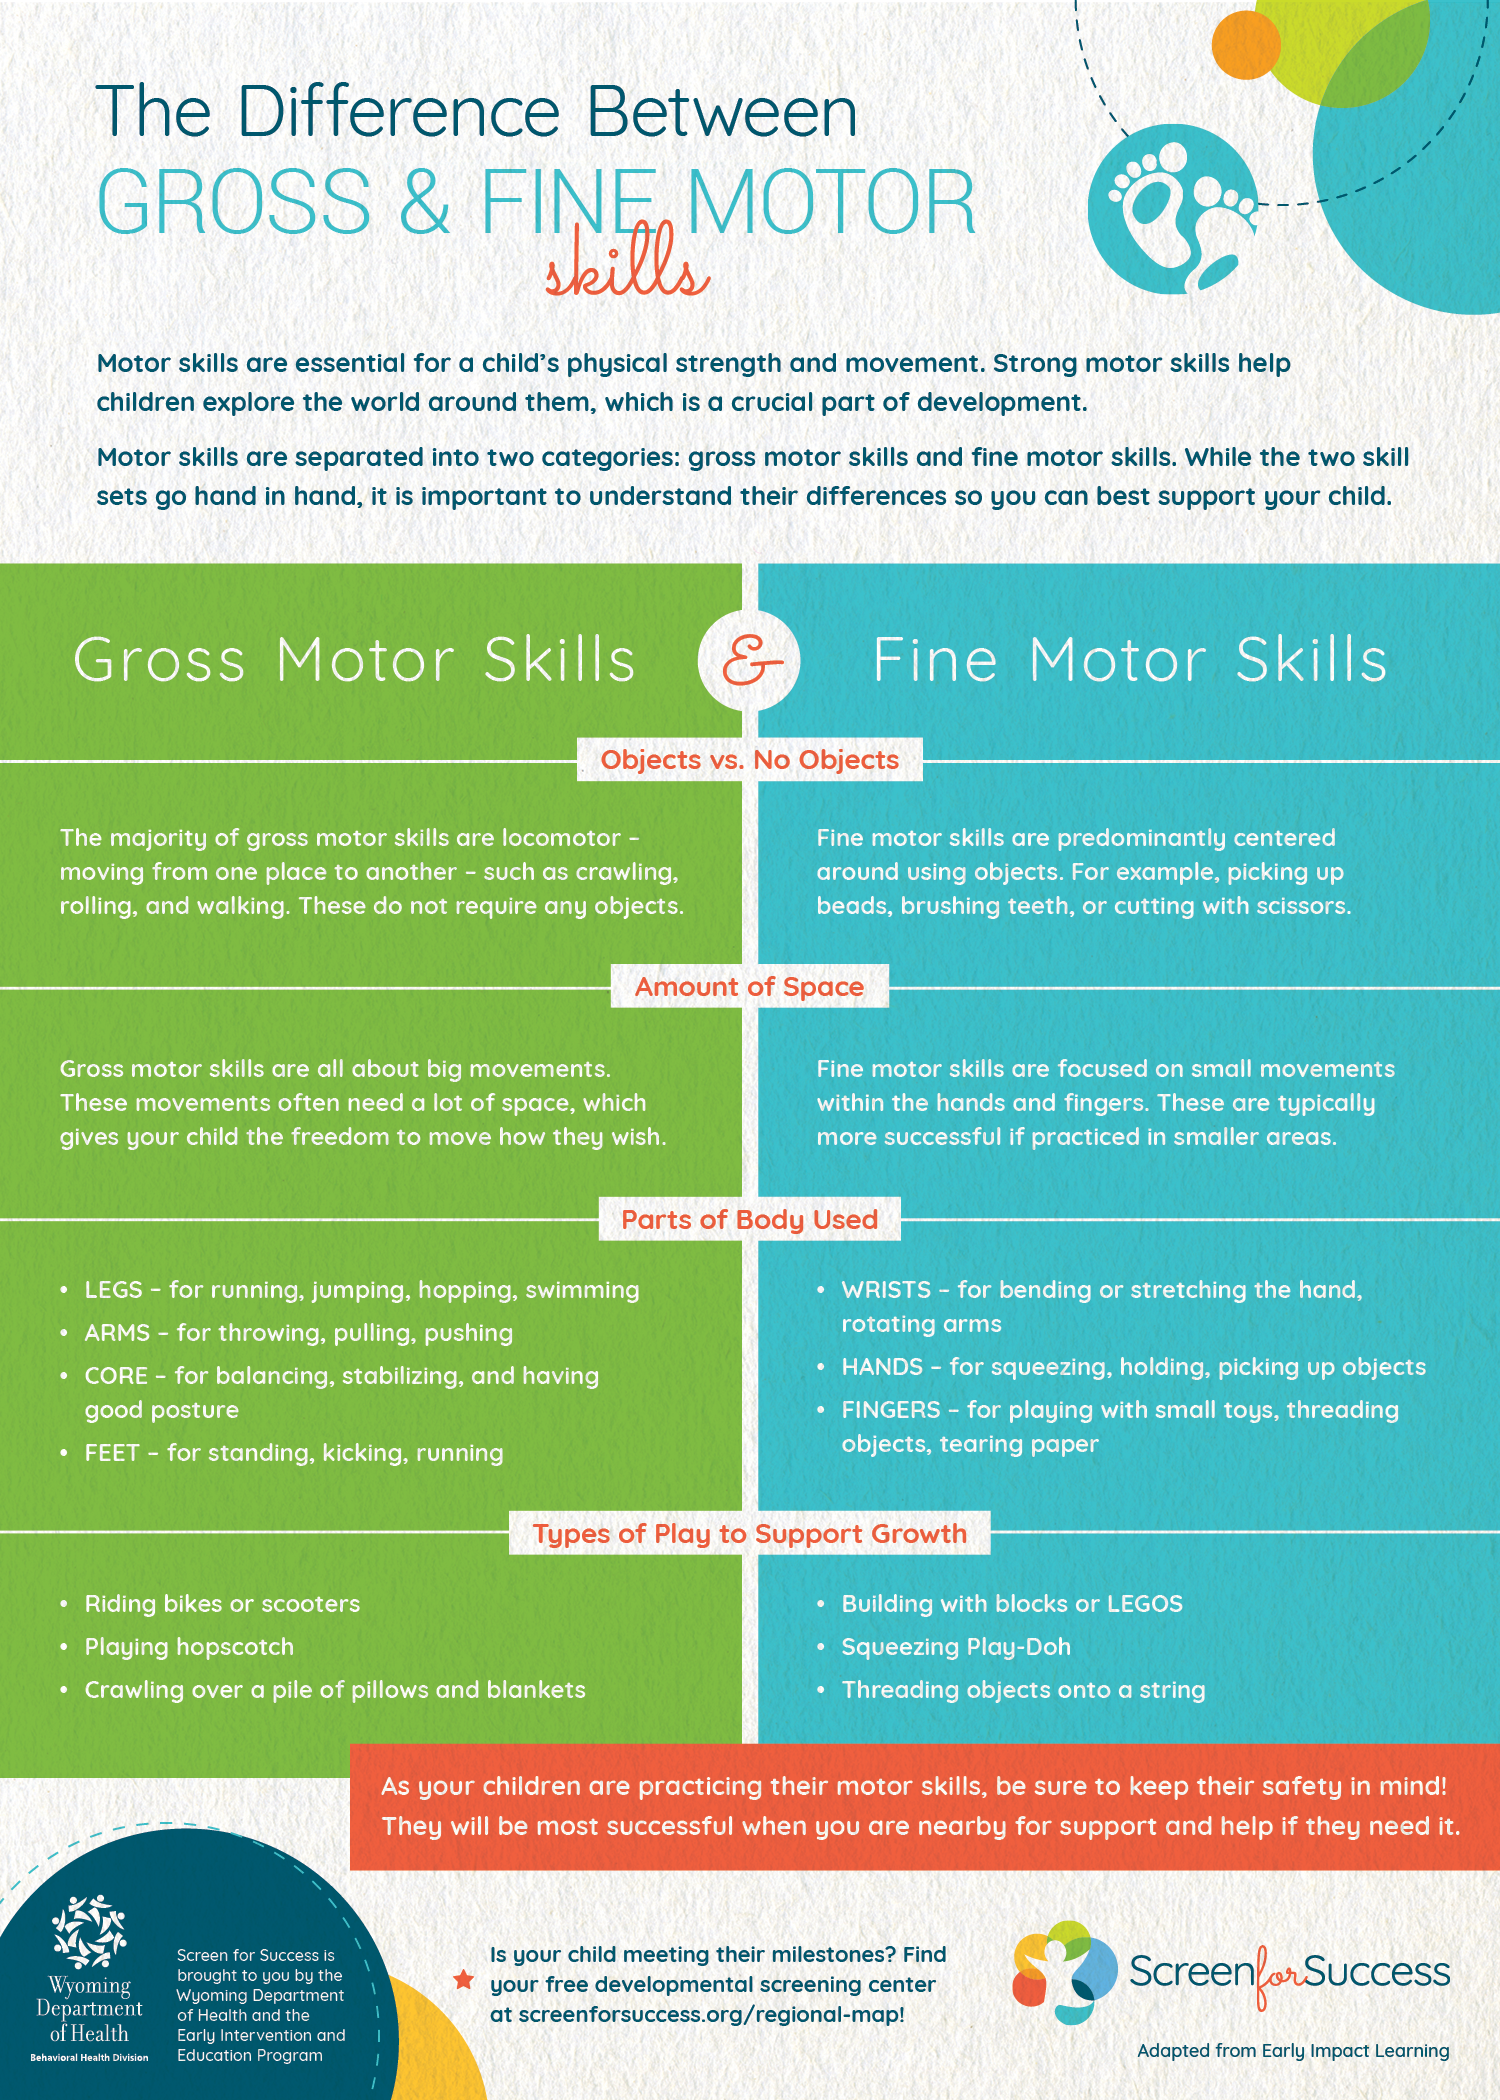 The Difference Between Gross & Fine Motor Skills